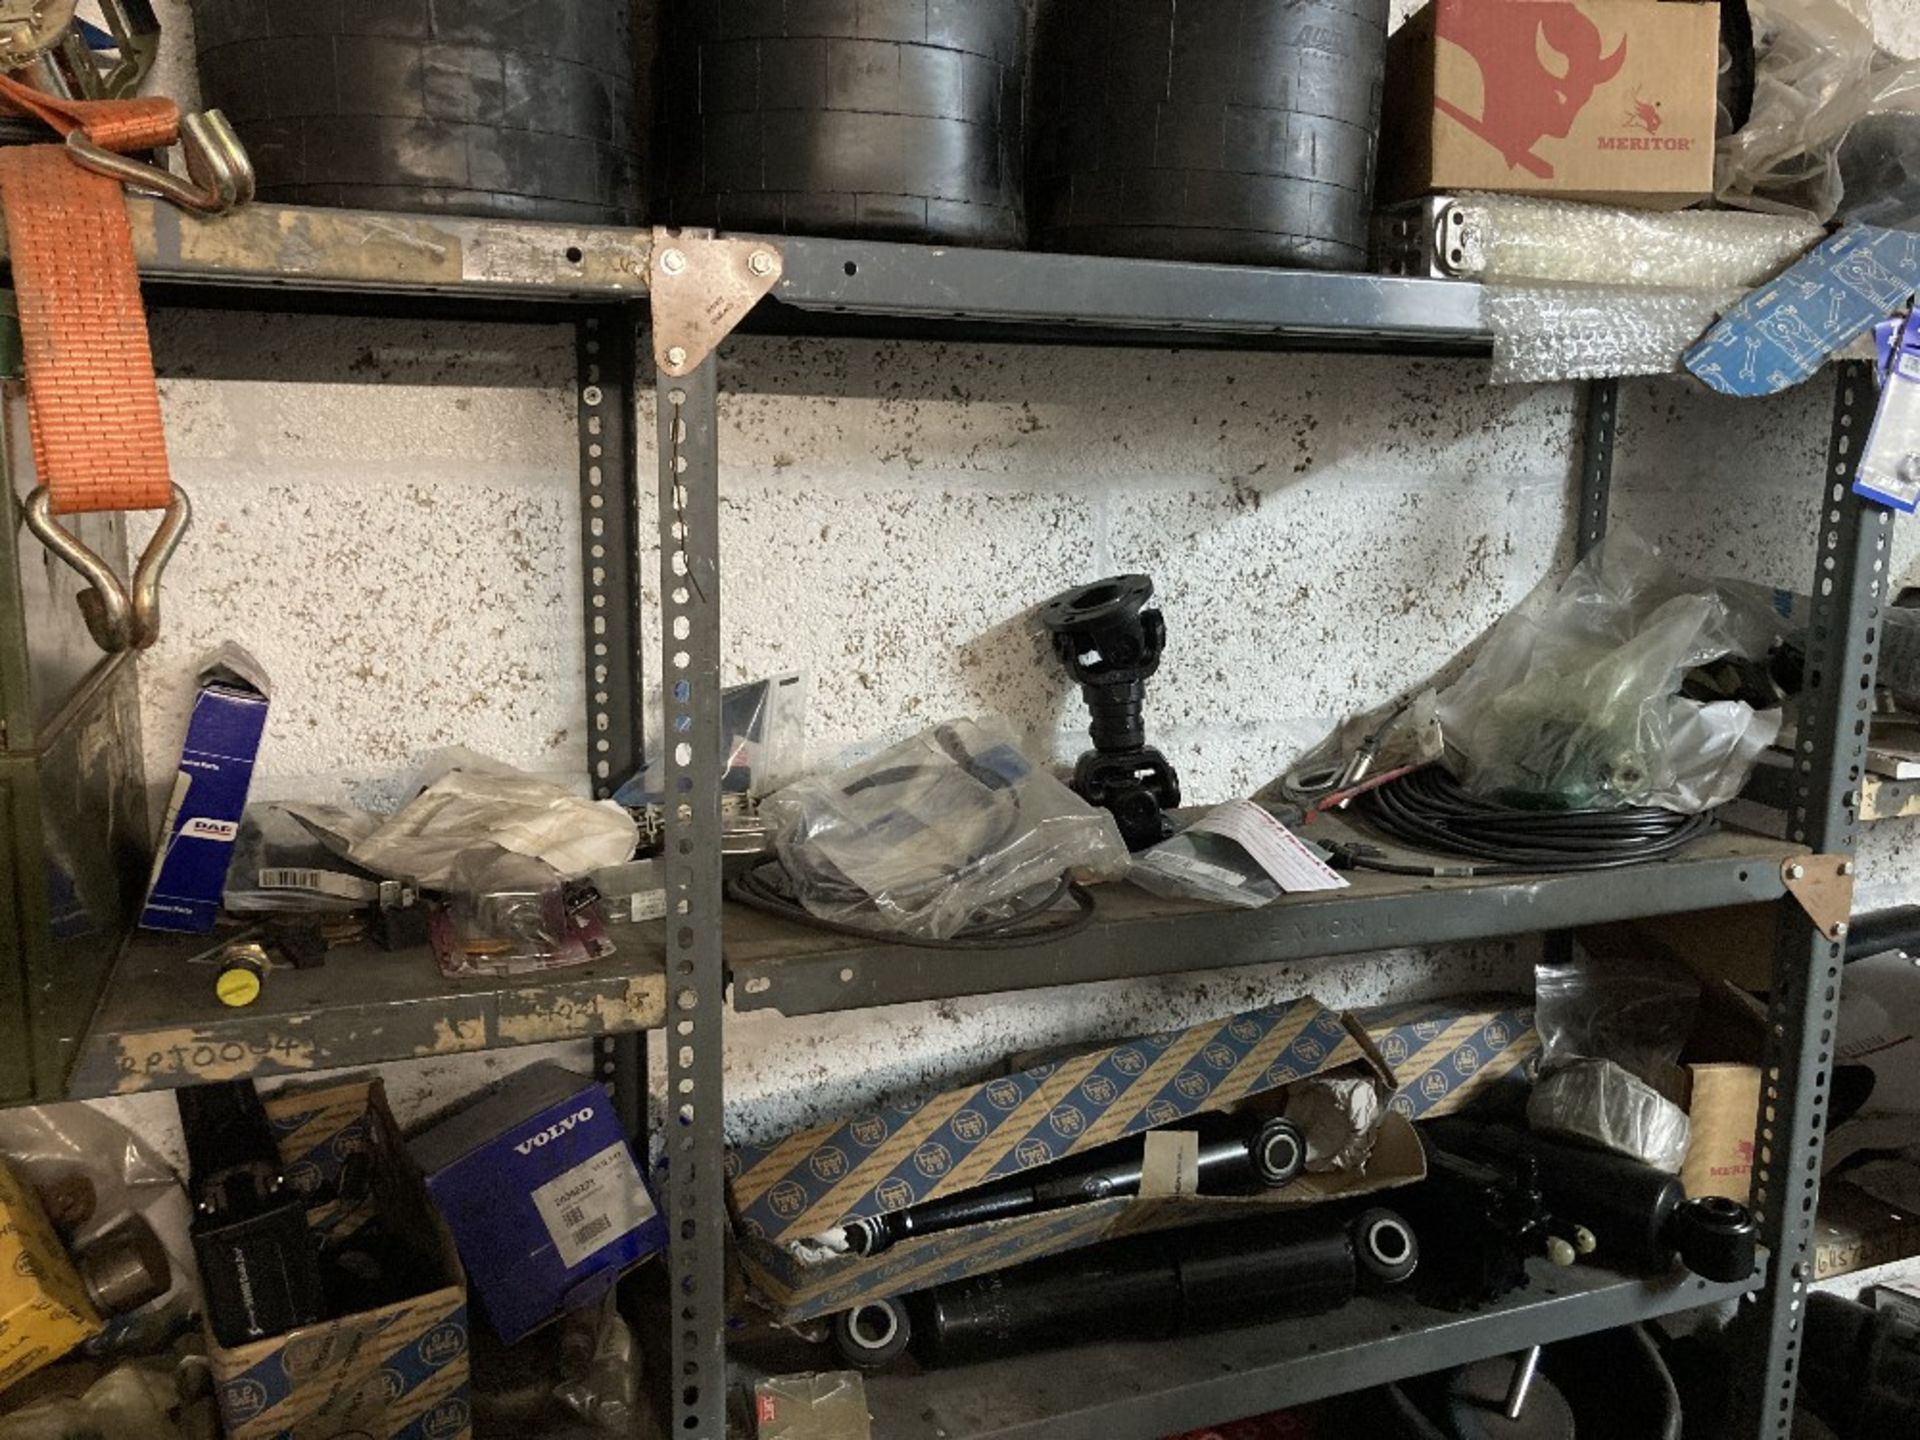 Content of Parts Room Containing Large Quantity of Various Parts & Components - Image 32 of 150